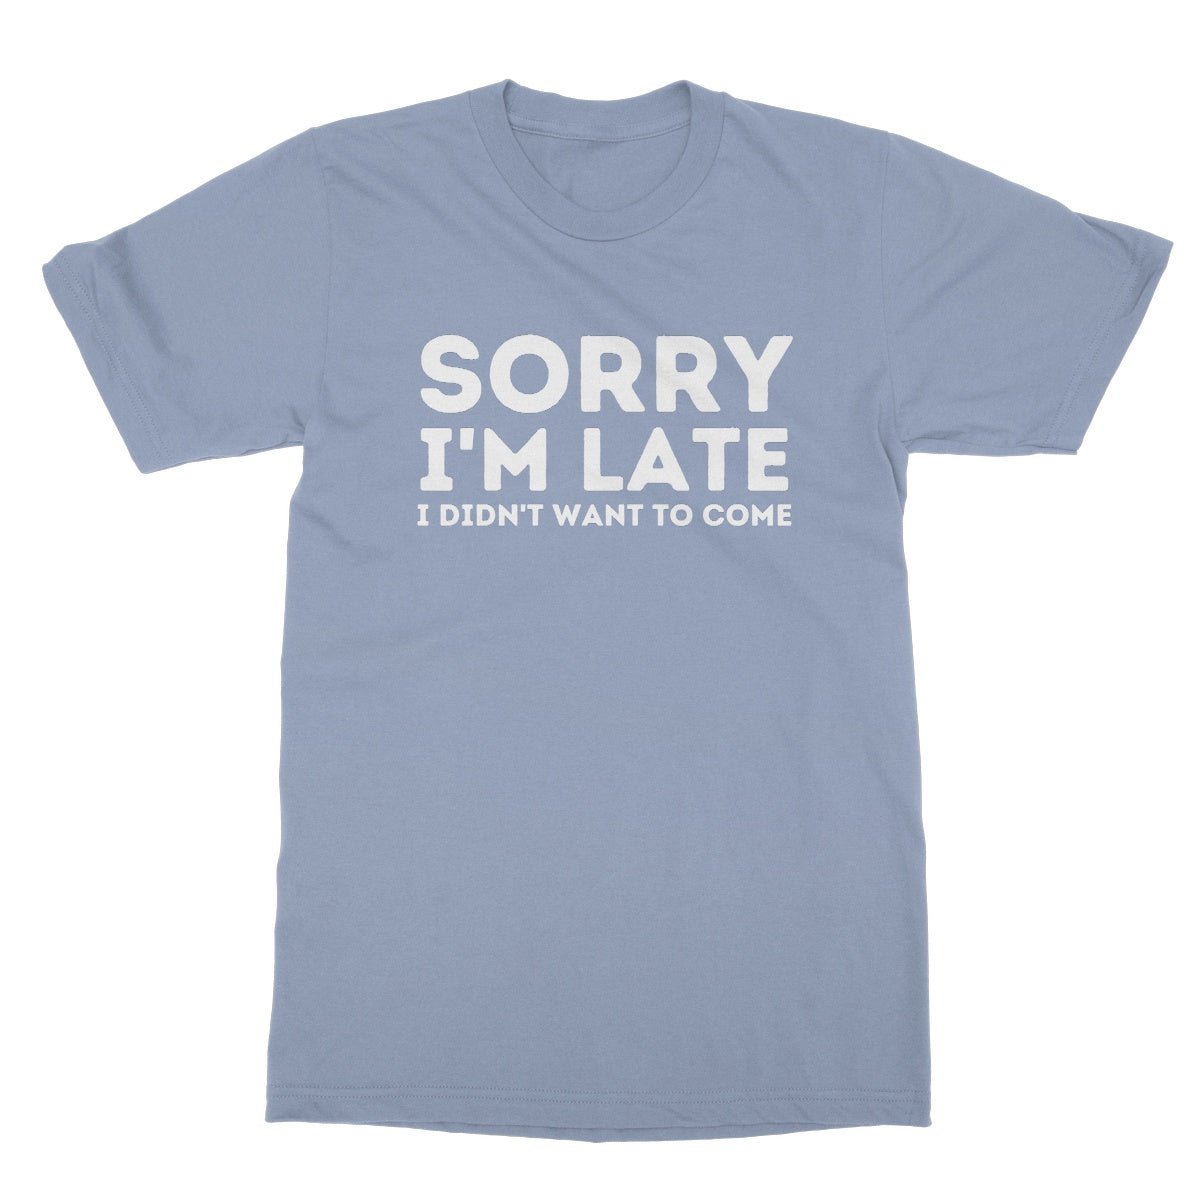 sorry I'm late I didn't want to come t shirt blue